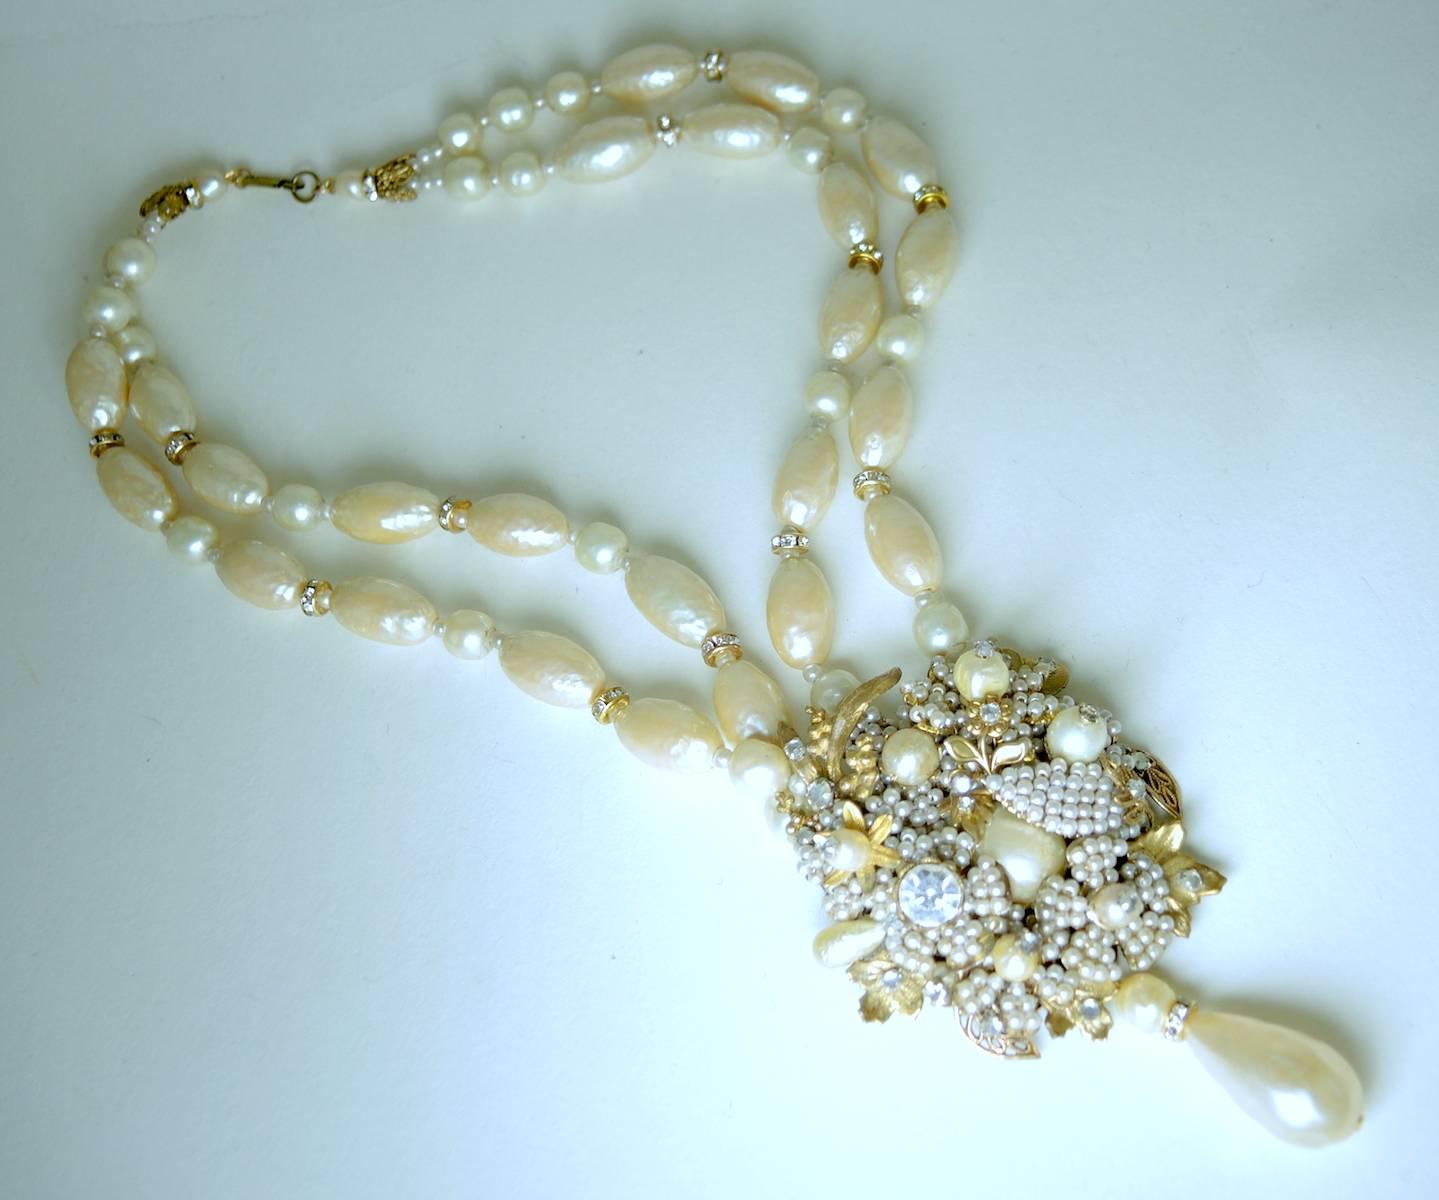 This striking Miriam Haskell necklace features an ornate centerpiece with seed pearls and rose montee accents in a gold-tone setting. There is a large oval teardrop pearl that dangles at the bottom of the centerpiece. The double strands are made